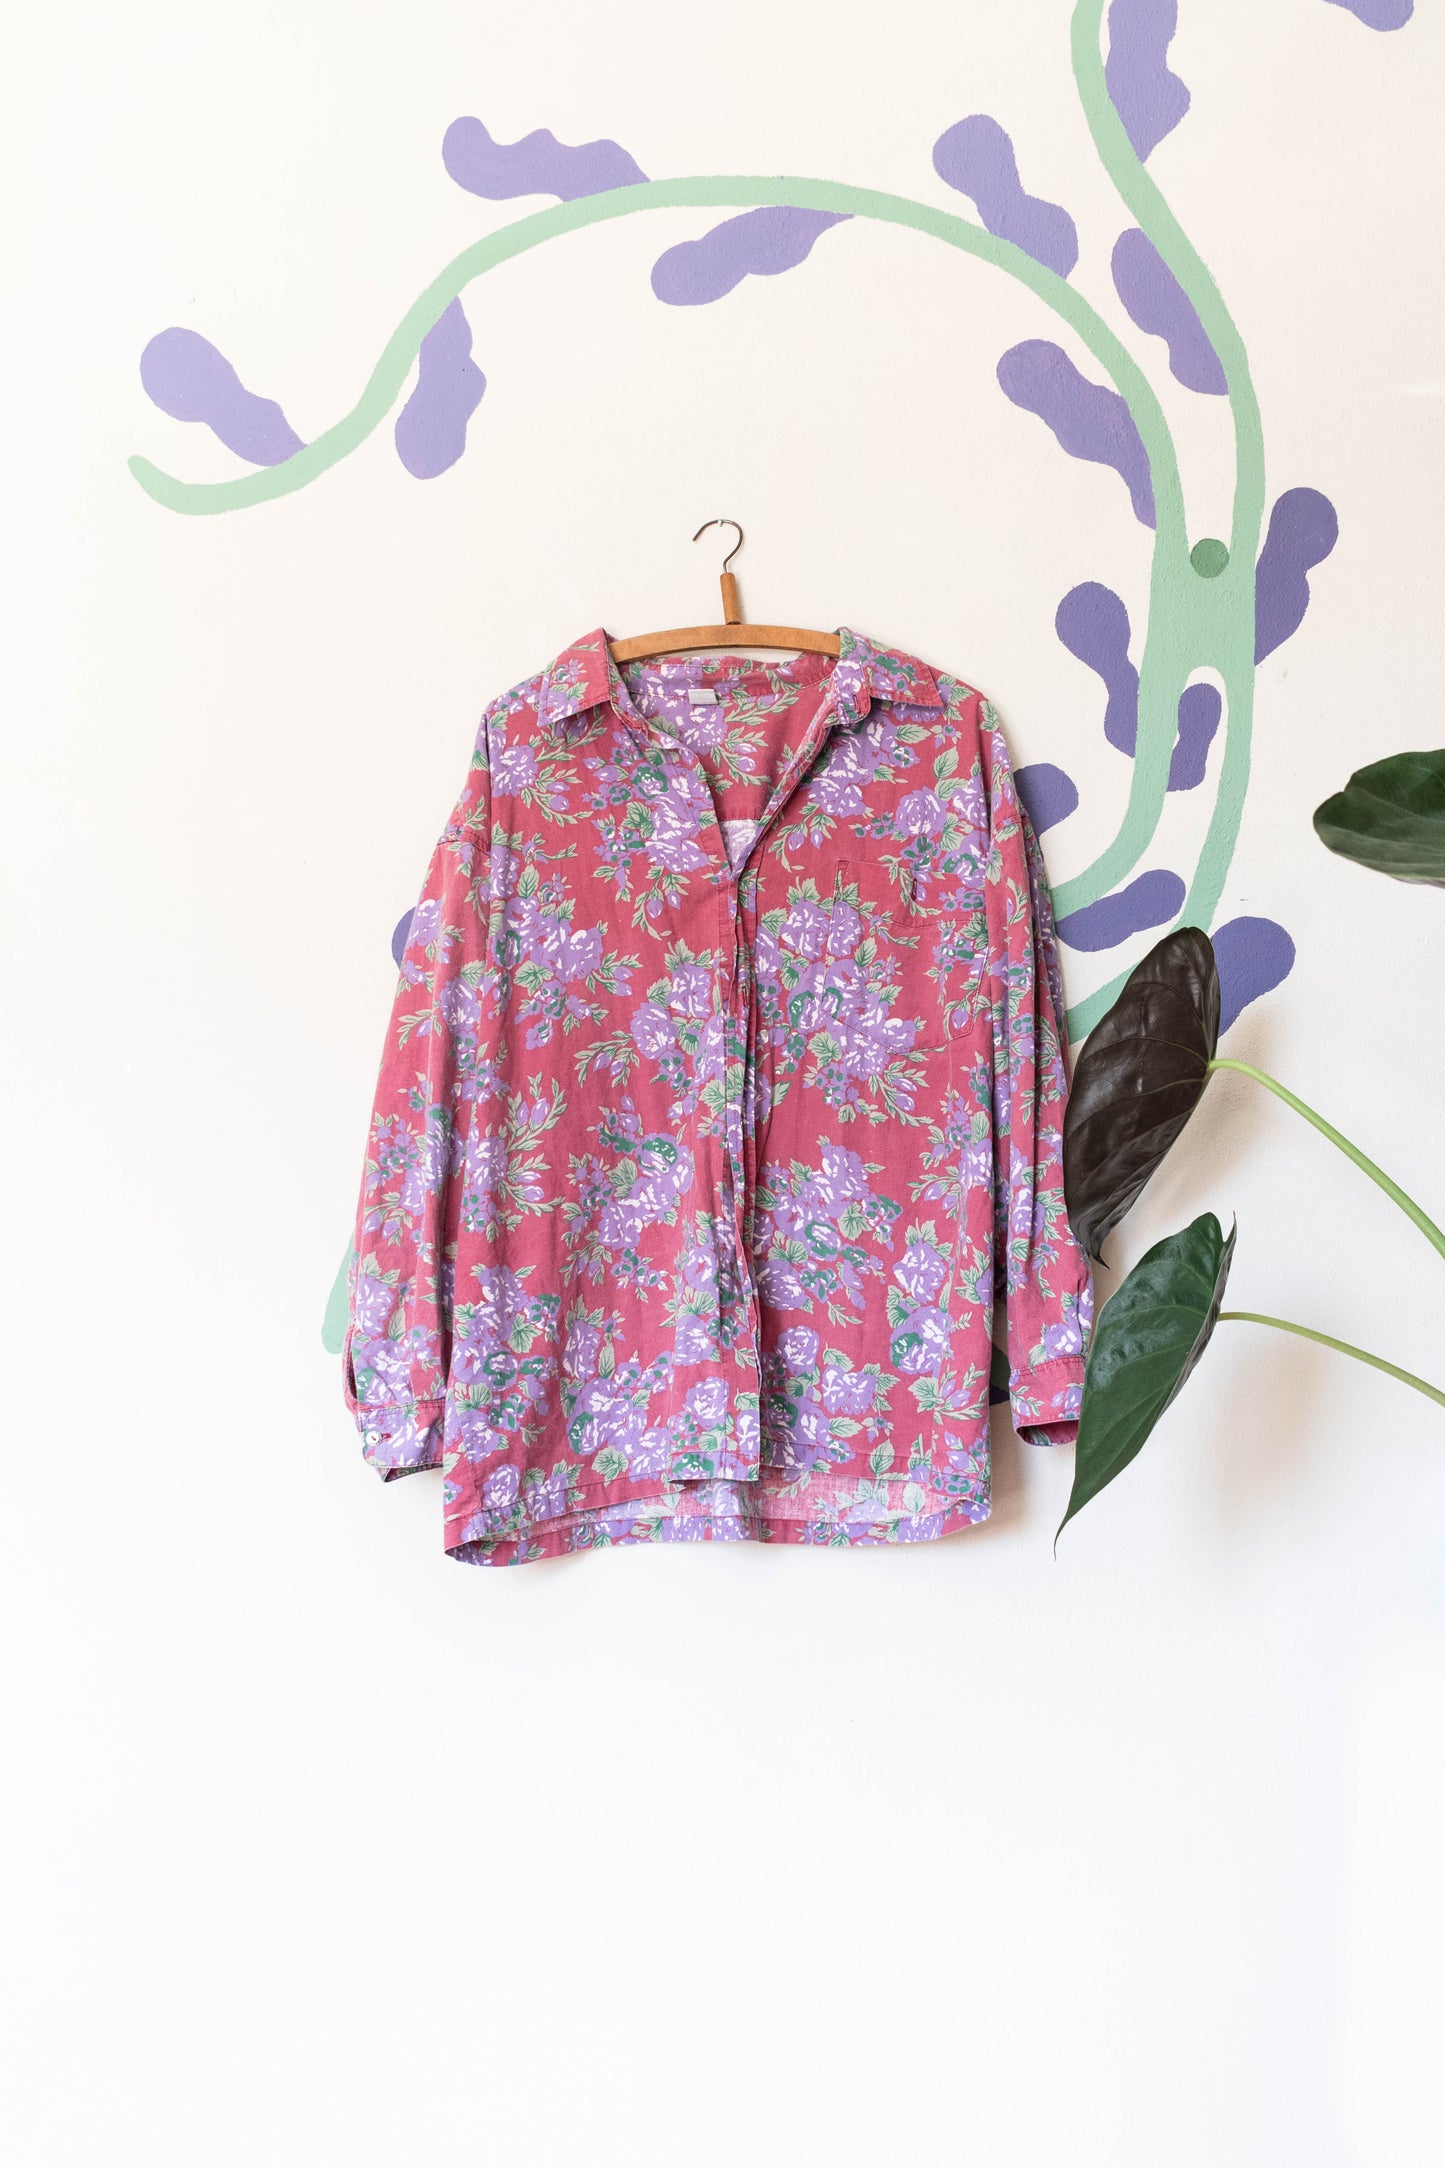 NEW IN! Floral shirt